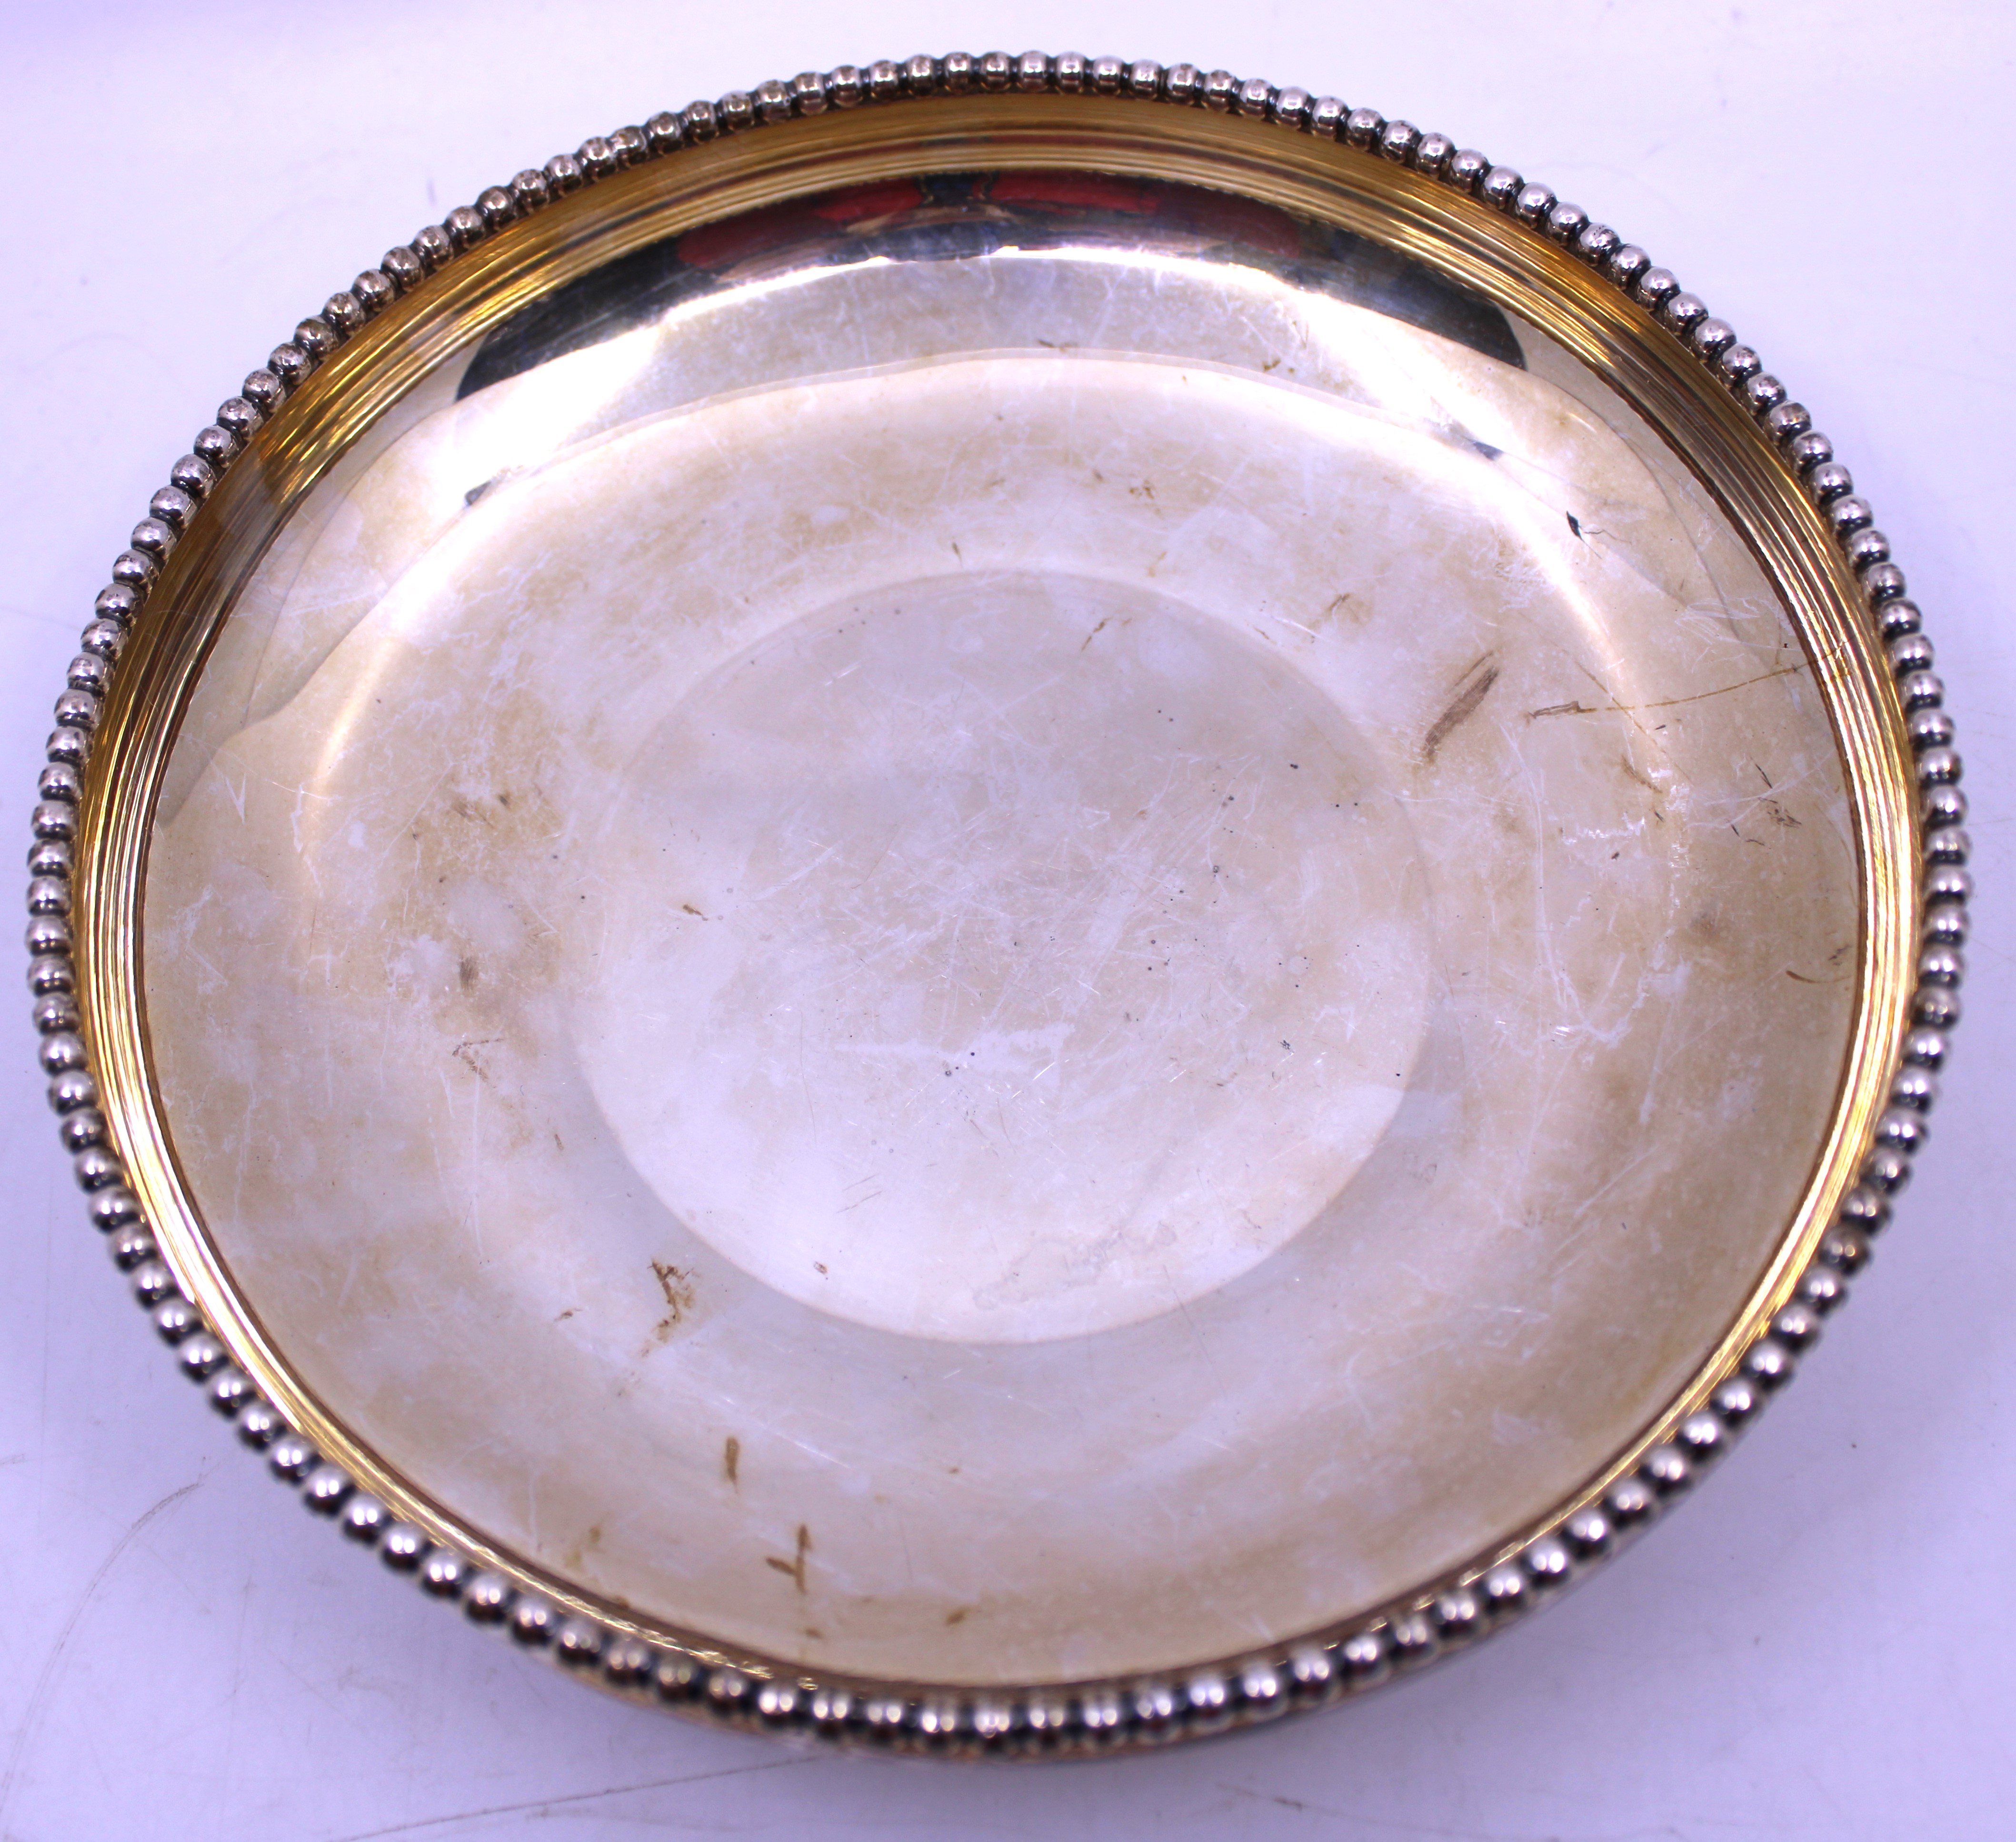 Norwegian Sterling Silver Three-Footed Bowl with beaded rim. The Bowl is engraved "HELGE AASLAND - Image 2 of 4